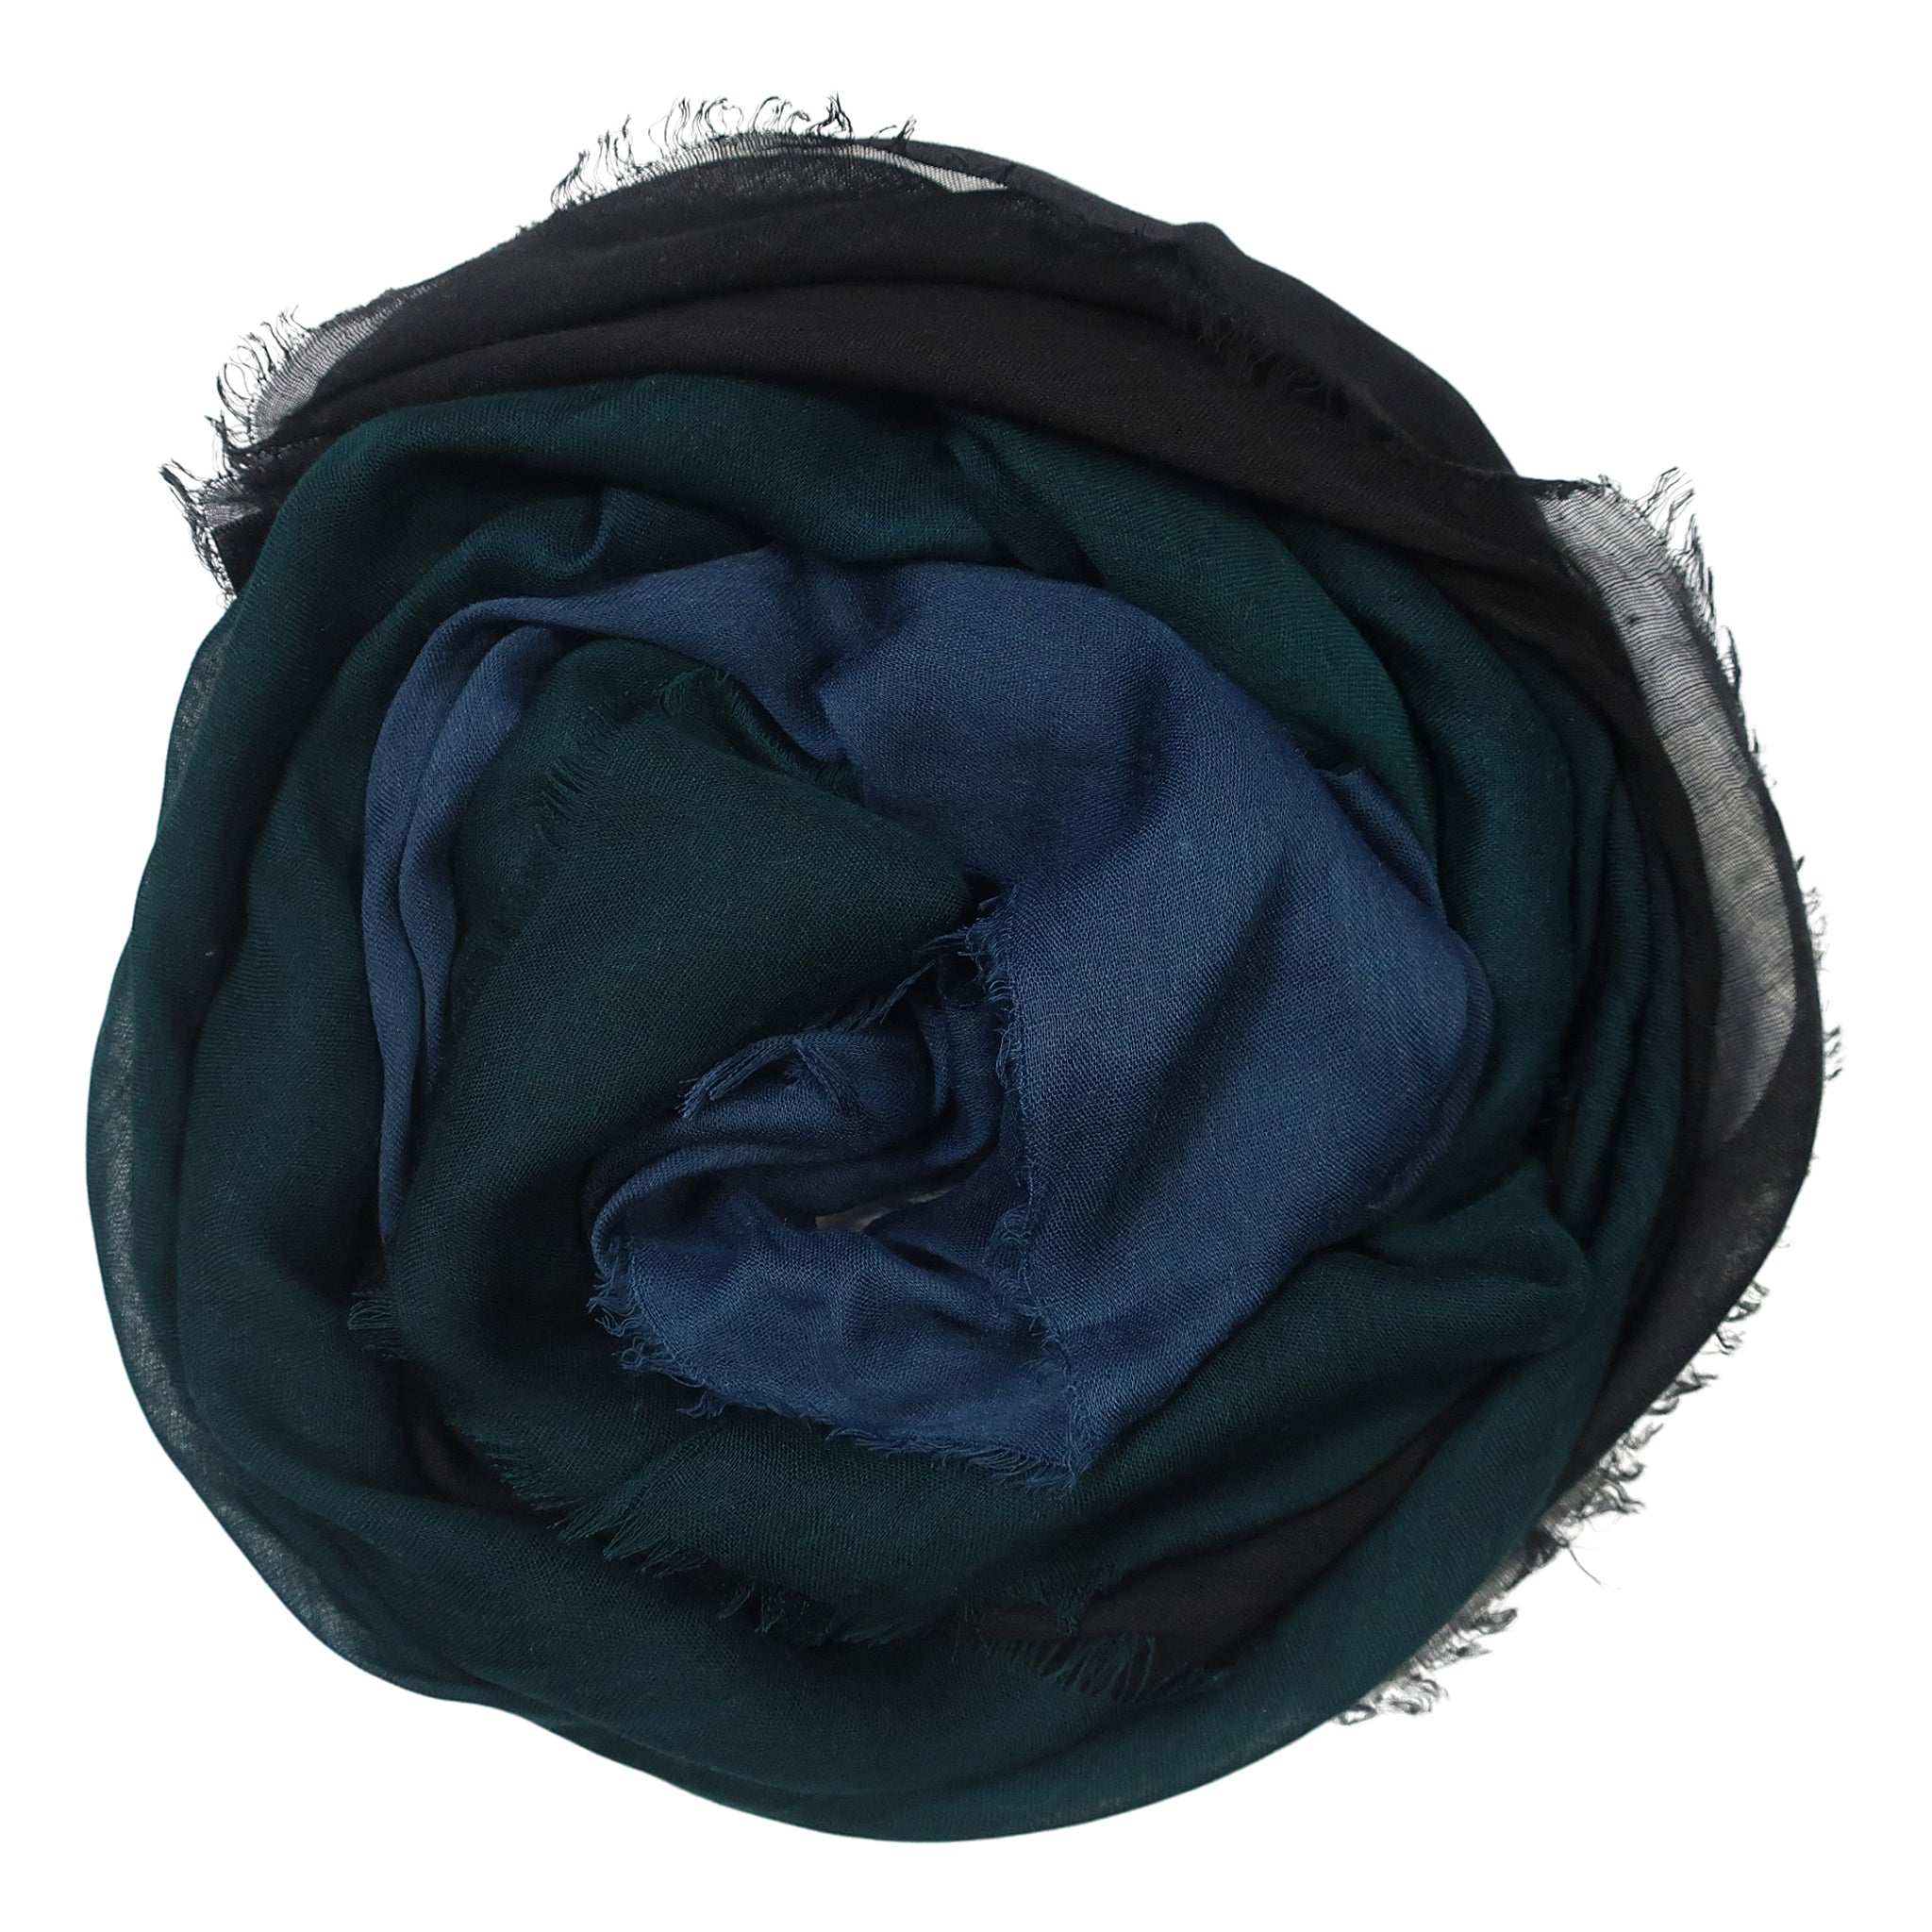 Blue Pacific Dream Cashmere and Silk Scarf in Blue and Teal 47 x 37